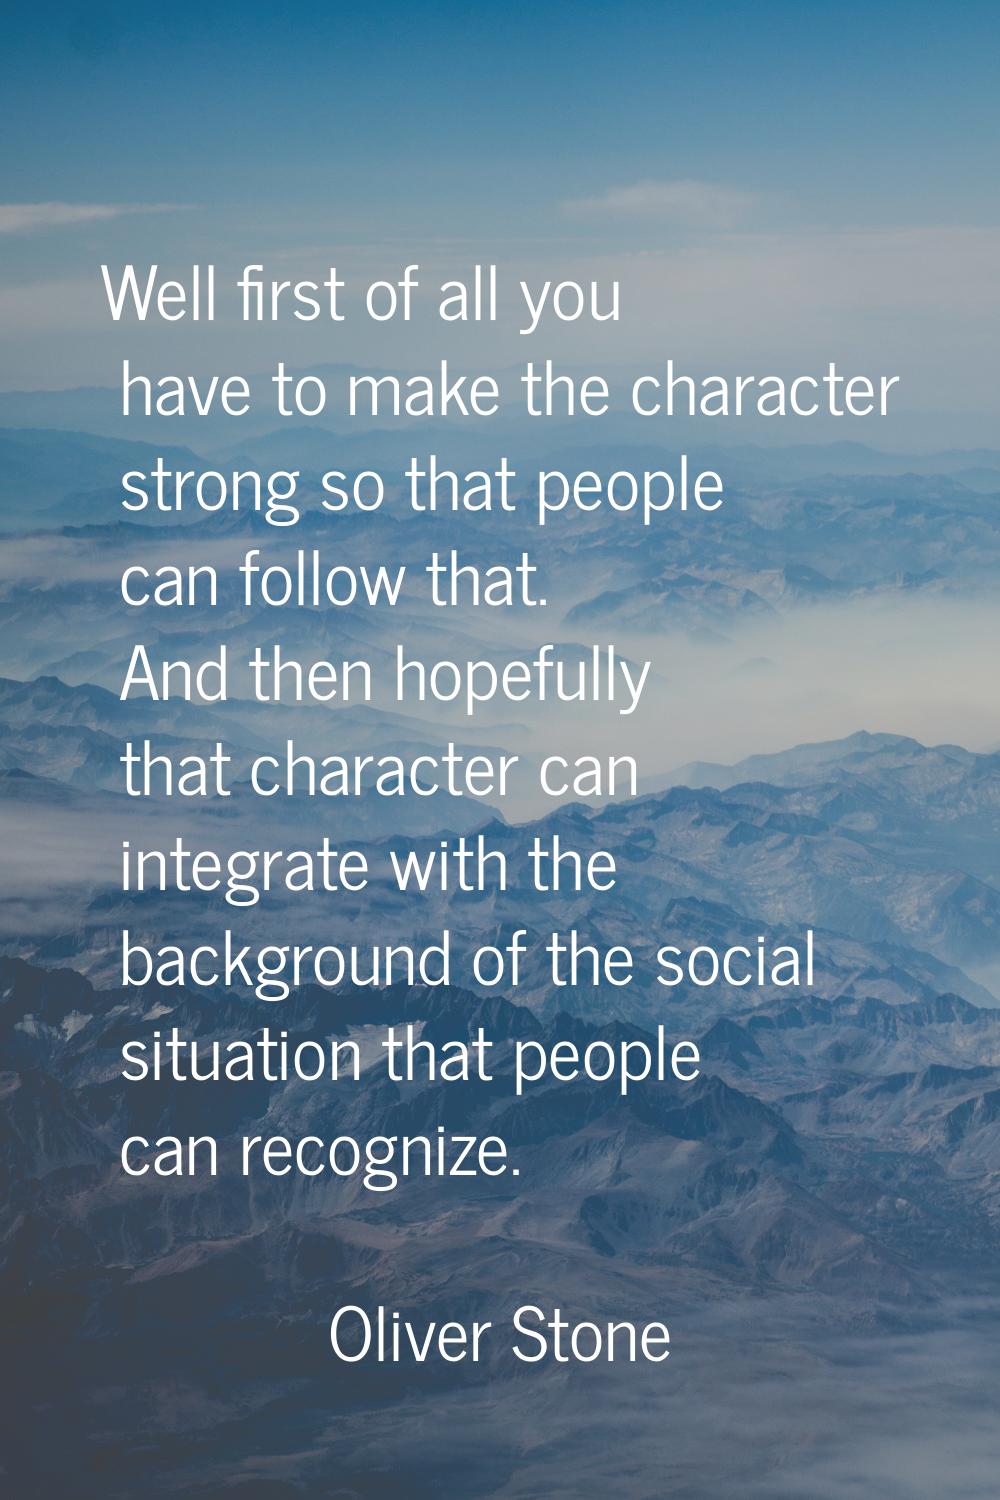 Well first of all you have to make the character strong so that people can follow that. And then ho